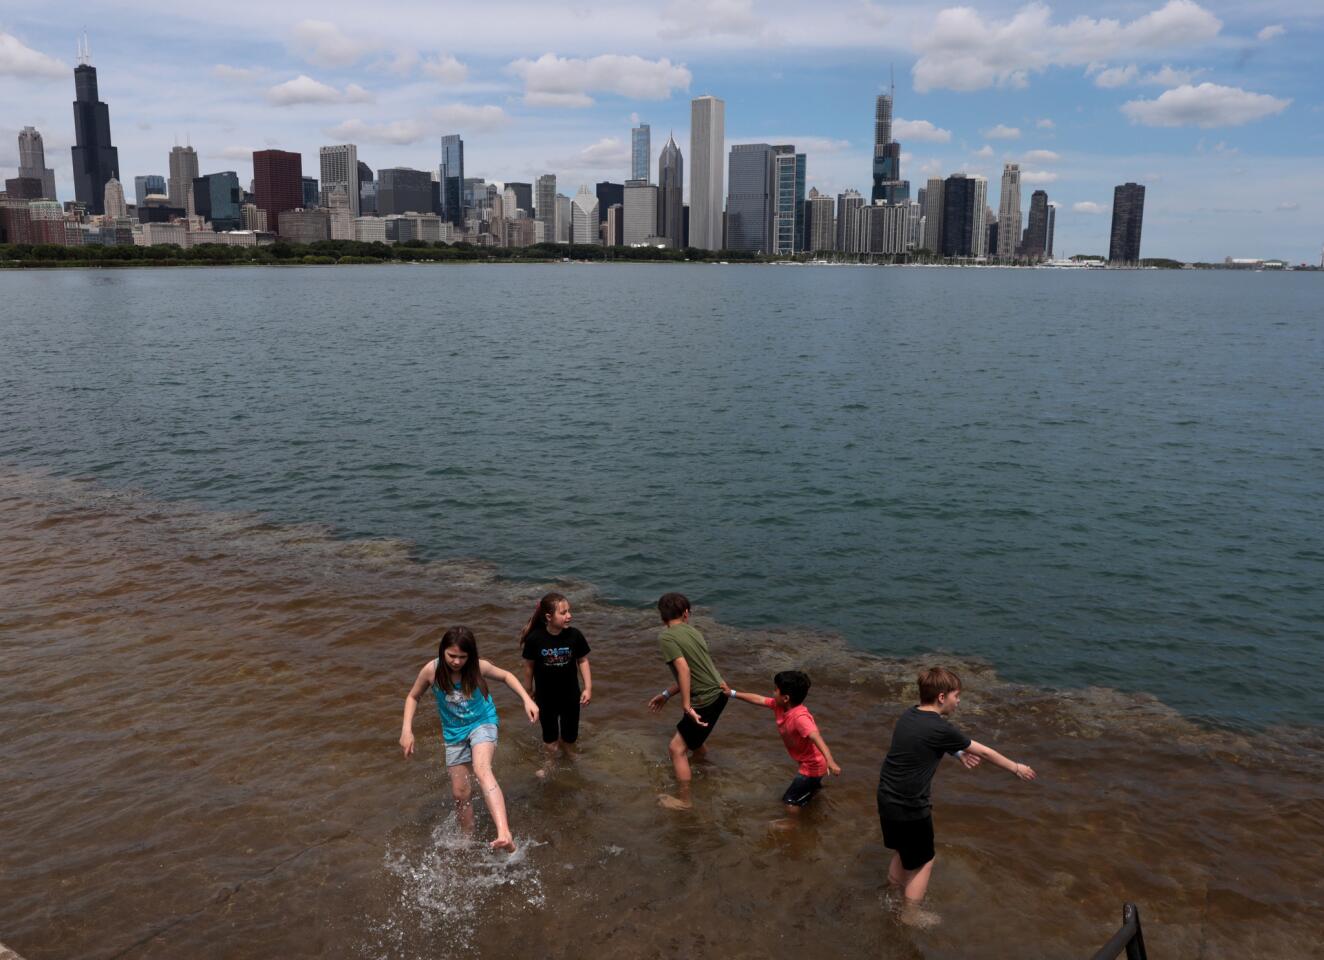 Siblings and cousins play in the flooded embankment as Lake Michigan floods over a wide pedestrian embankment at Solidarity Drive just outside the Adler Planetarium in Chicago, June 5, 2019.